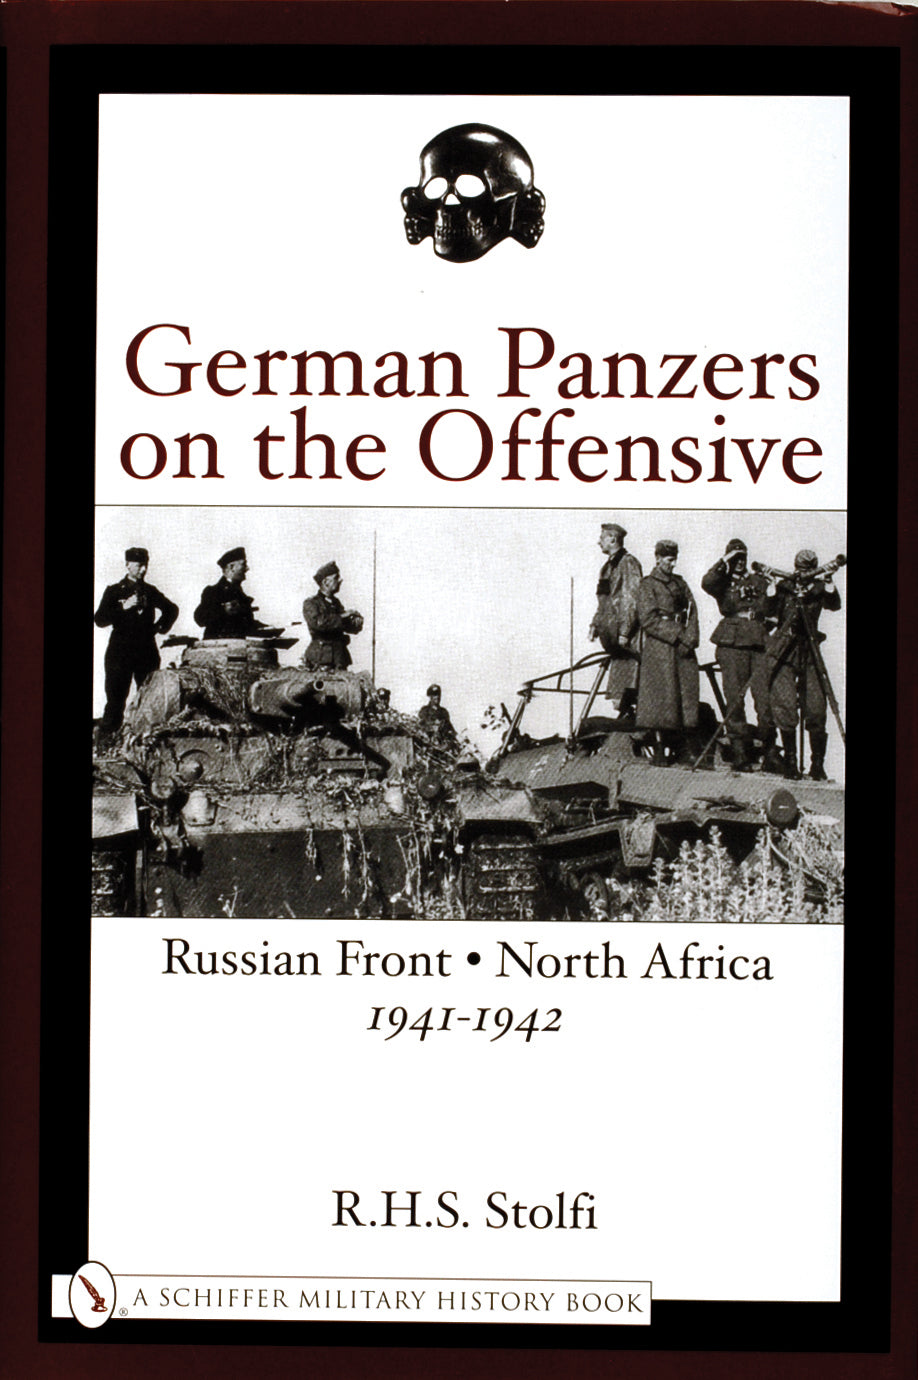 German Panzers on the Offensive